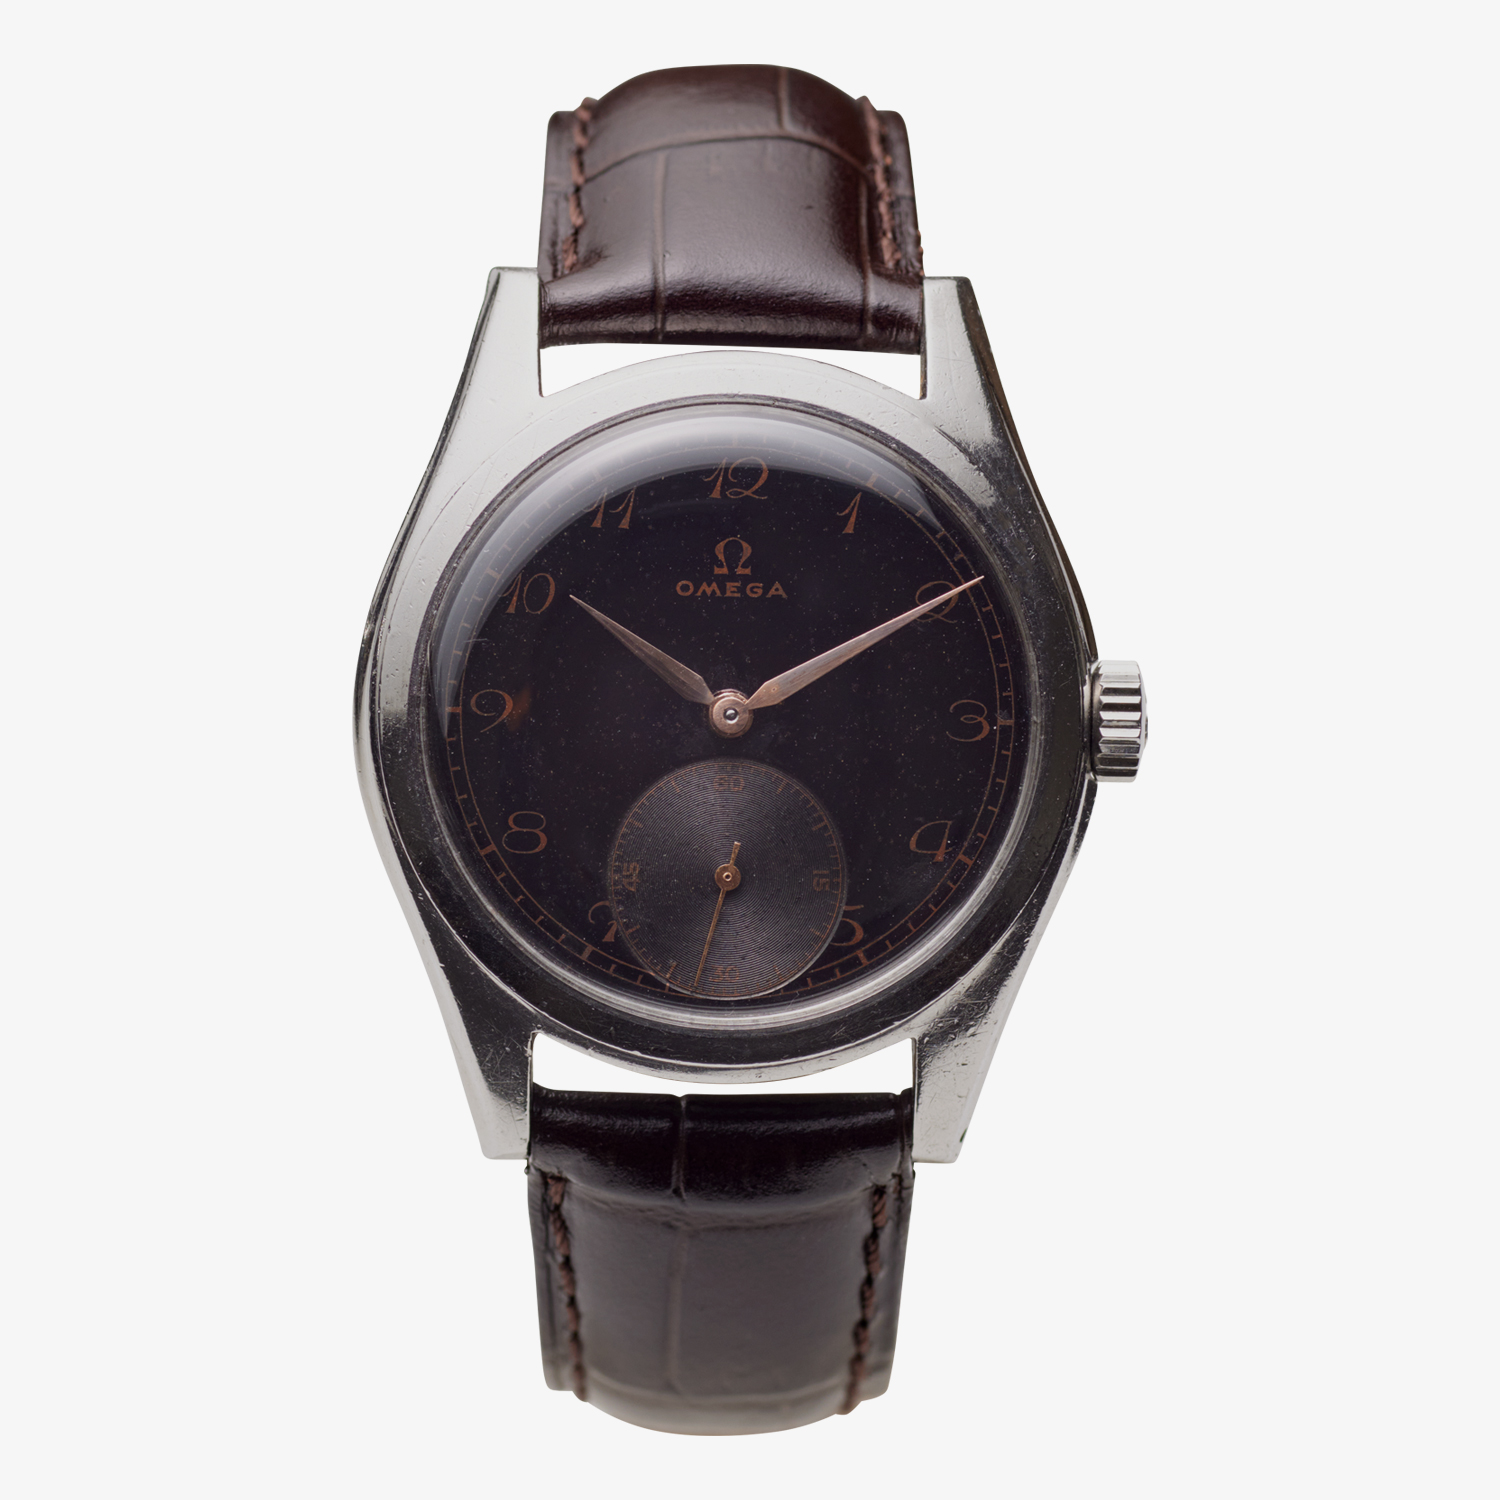 OMEGA｜Black Dial - Copper Index｜Small Second｜SS - 40's｜OMEGA (Vintage Watch)